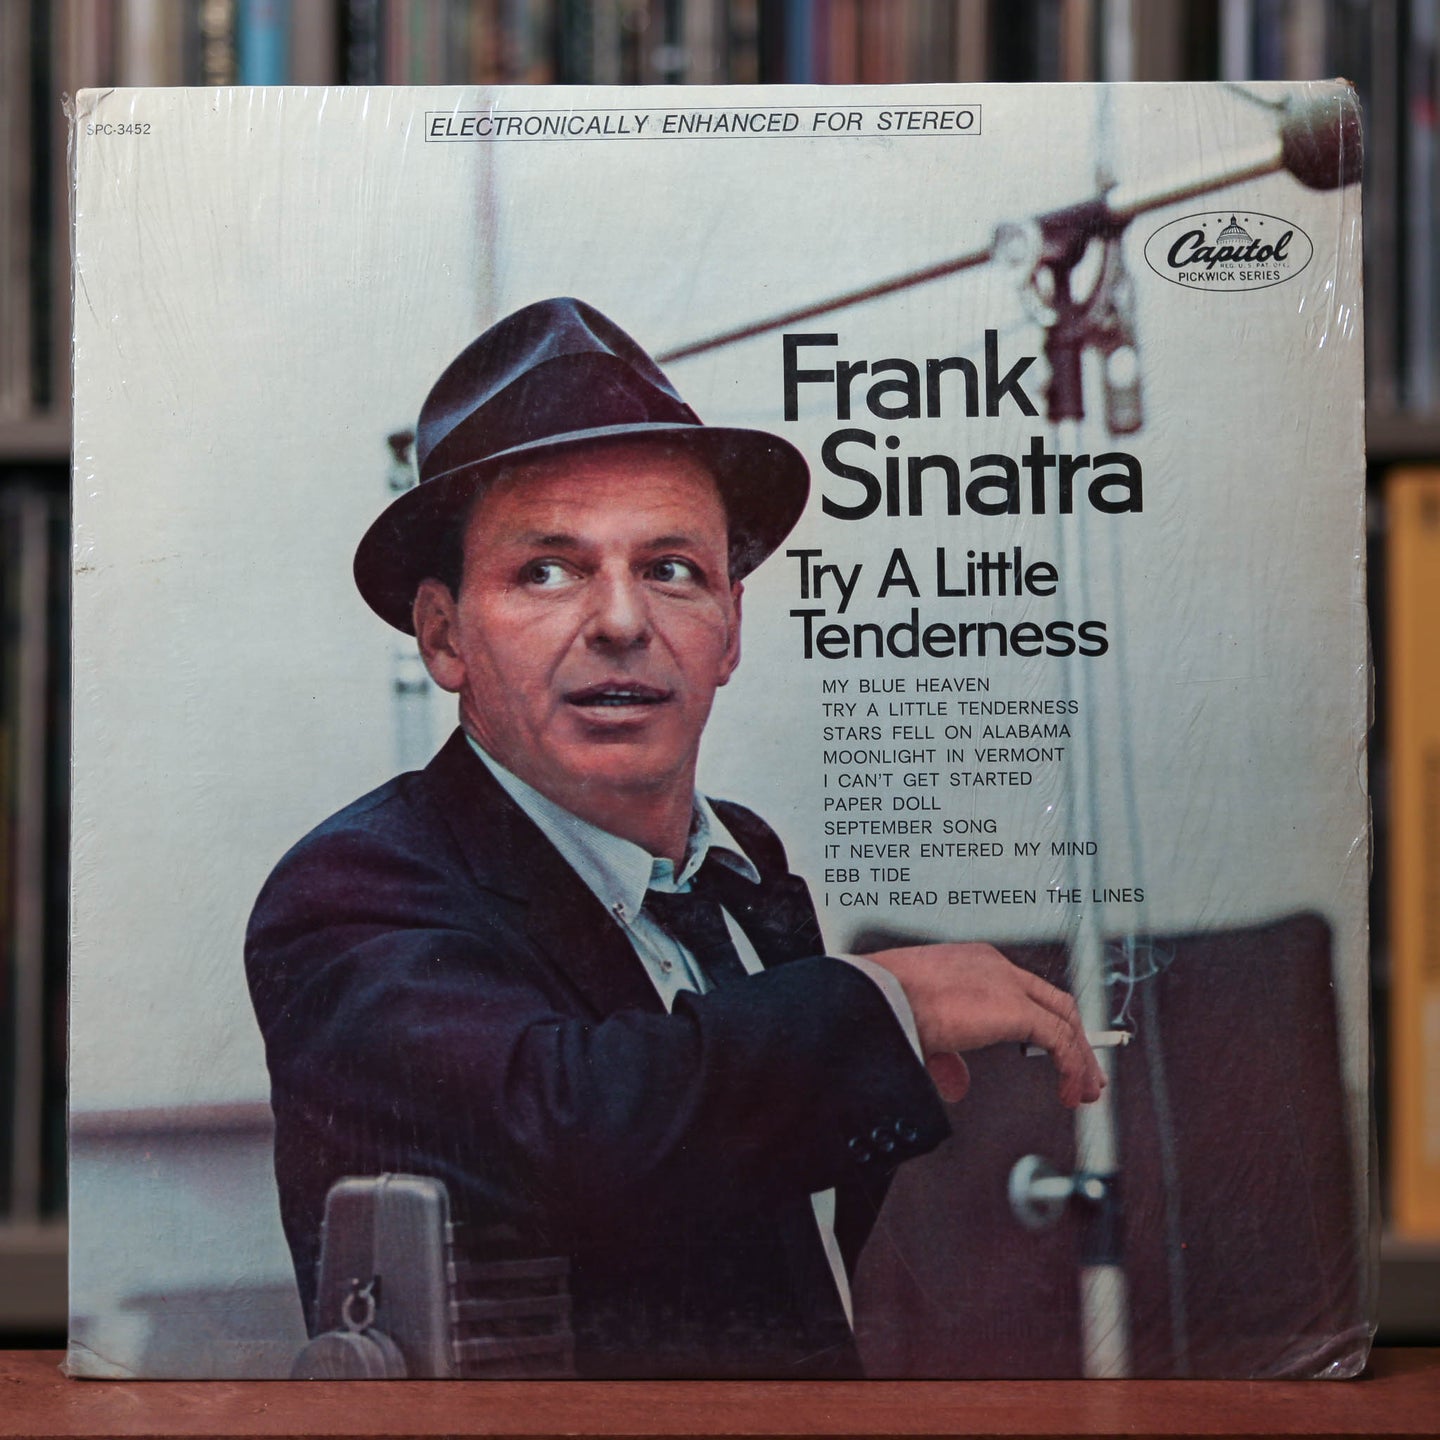 Frank Sinatra - Try A Little Tenderness - 1967 Capitol, VG+/VG+ w/Shrink